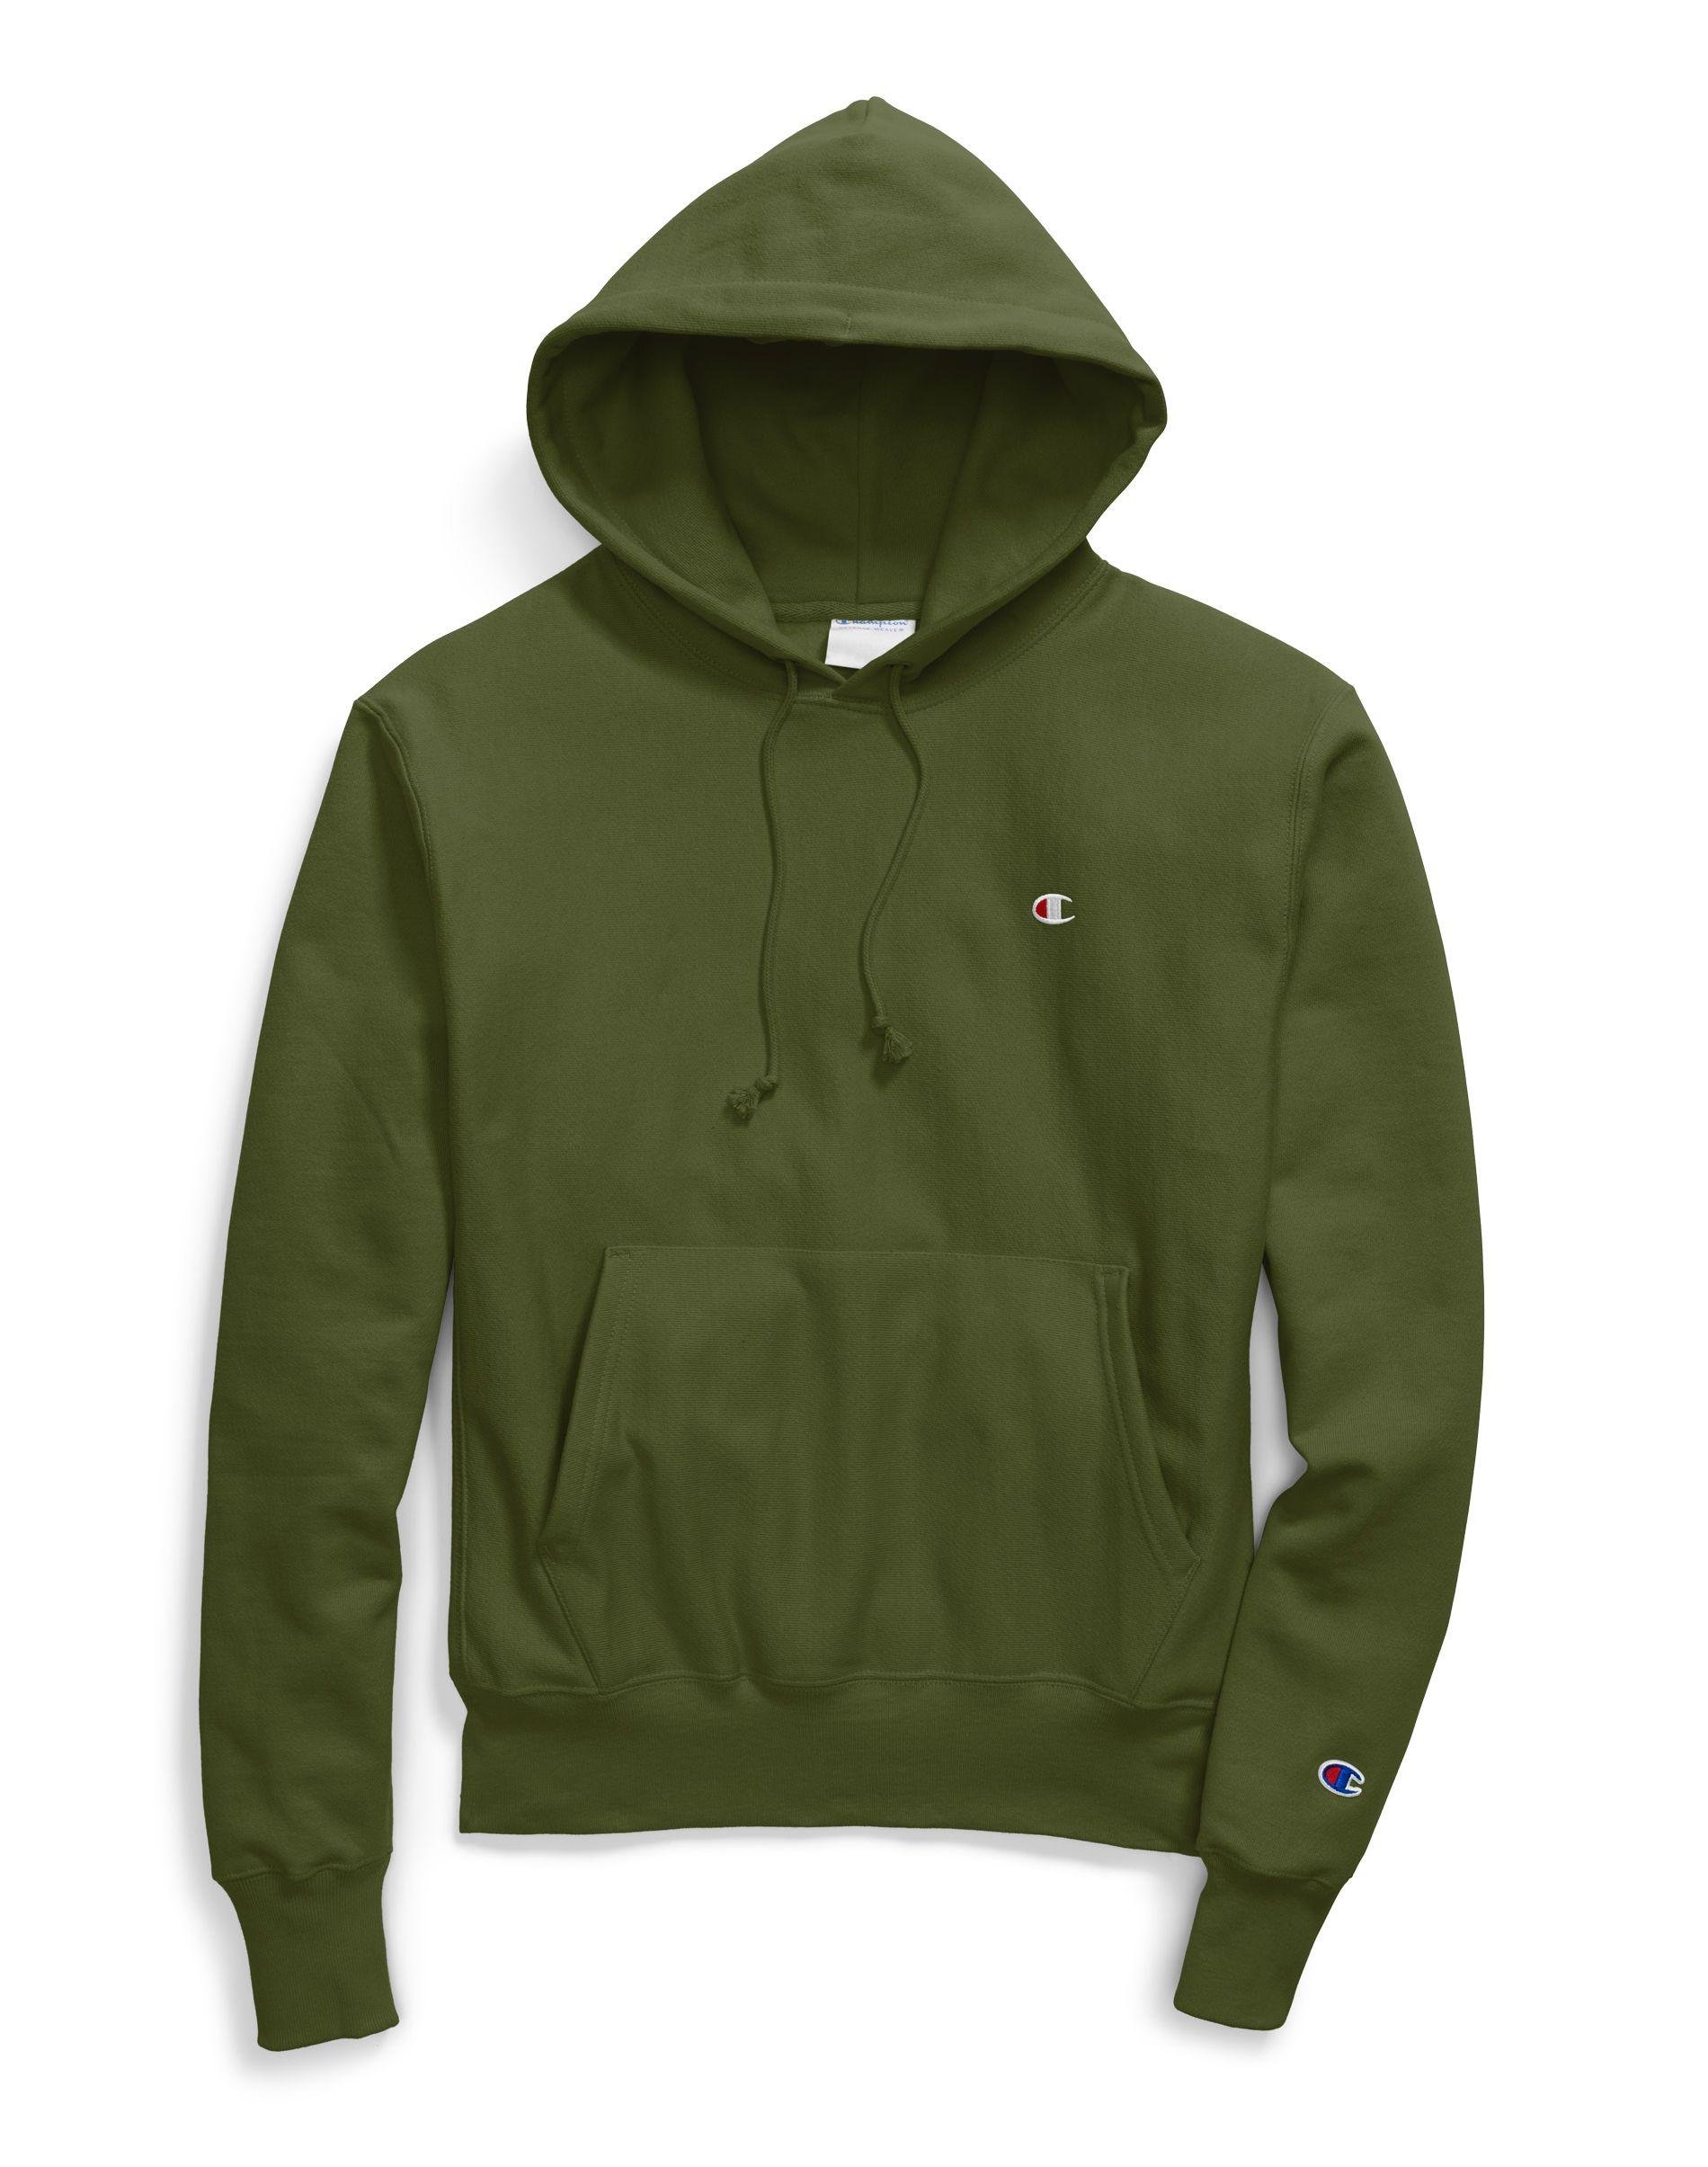 Parity > champion green reverse weave hoodie, Up to 78% OFF